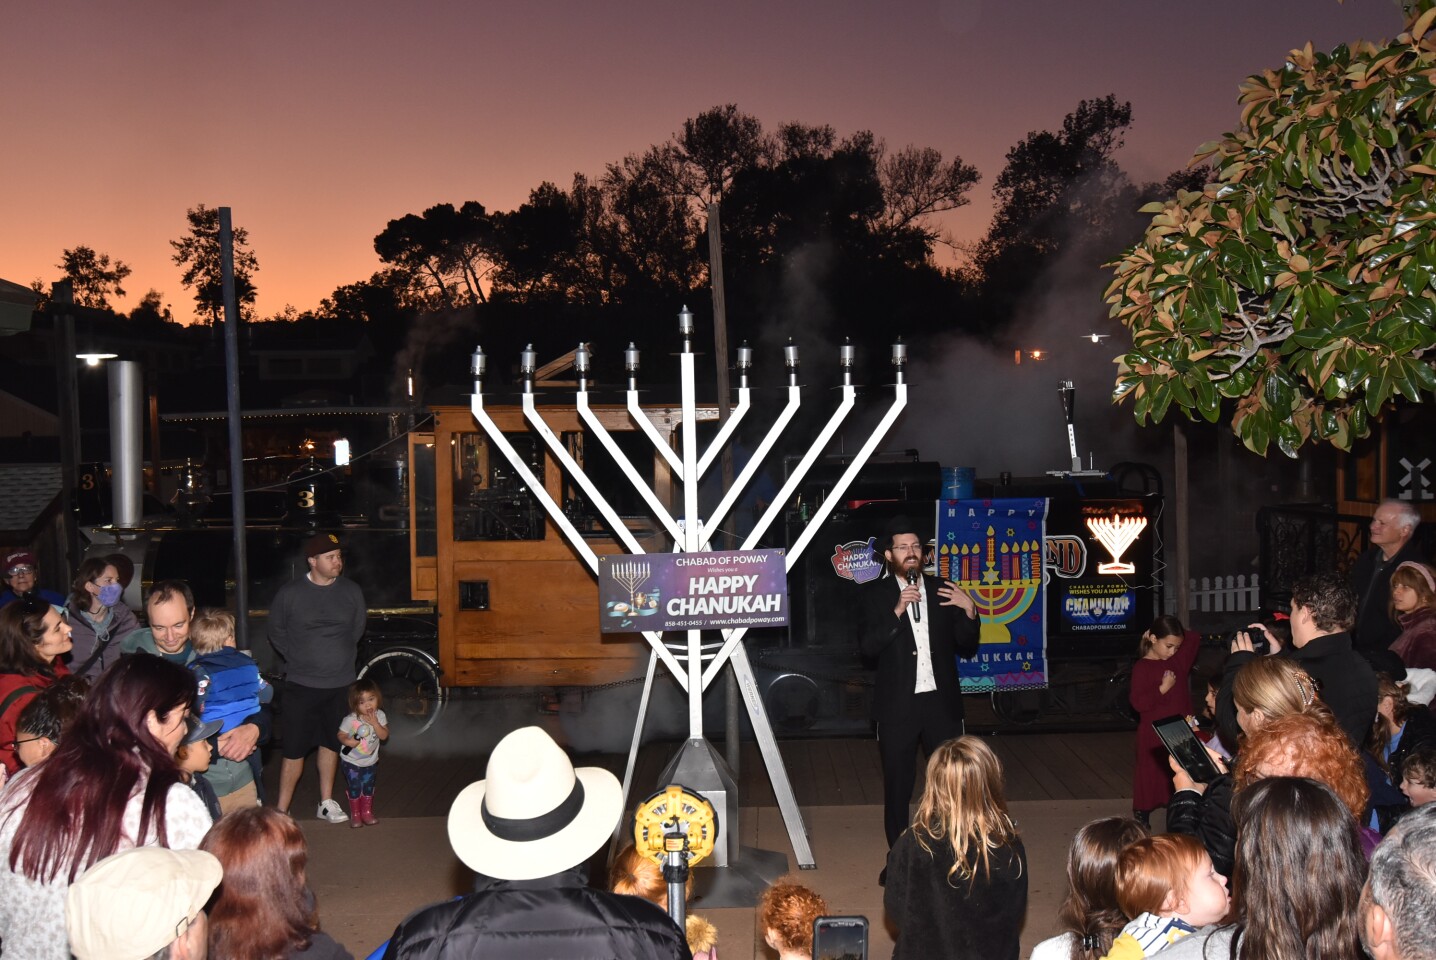 Rabbi Mendel welcomes everyone to the first Chabad of Poway Chanukah celebration at Old Poway Park.